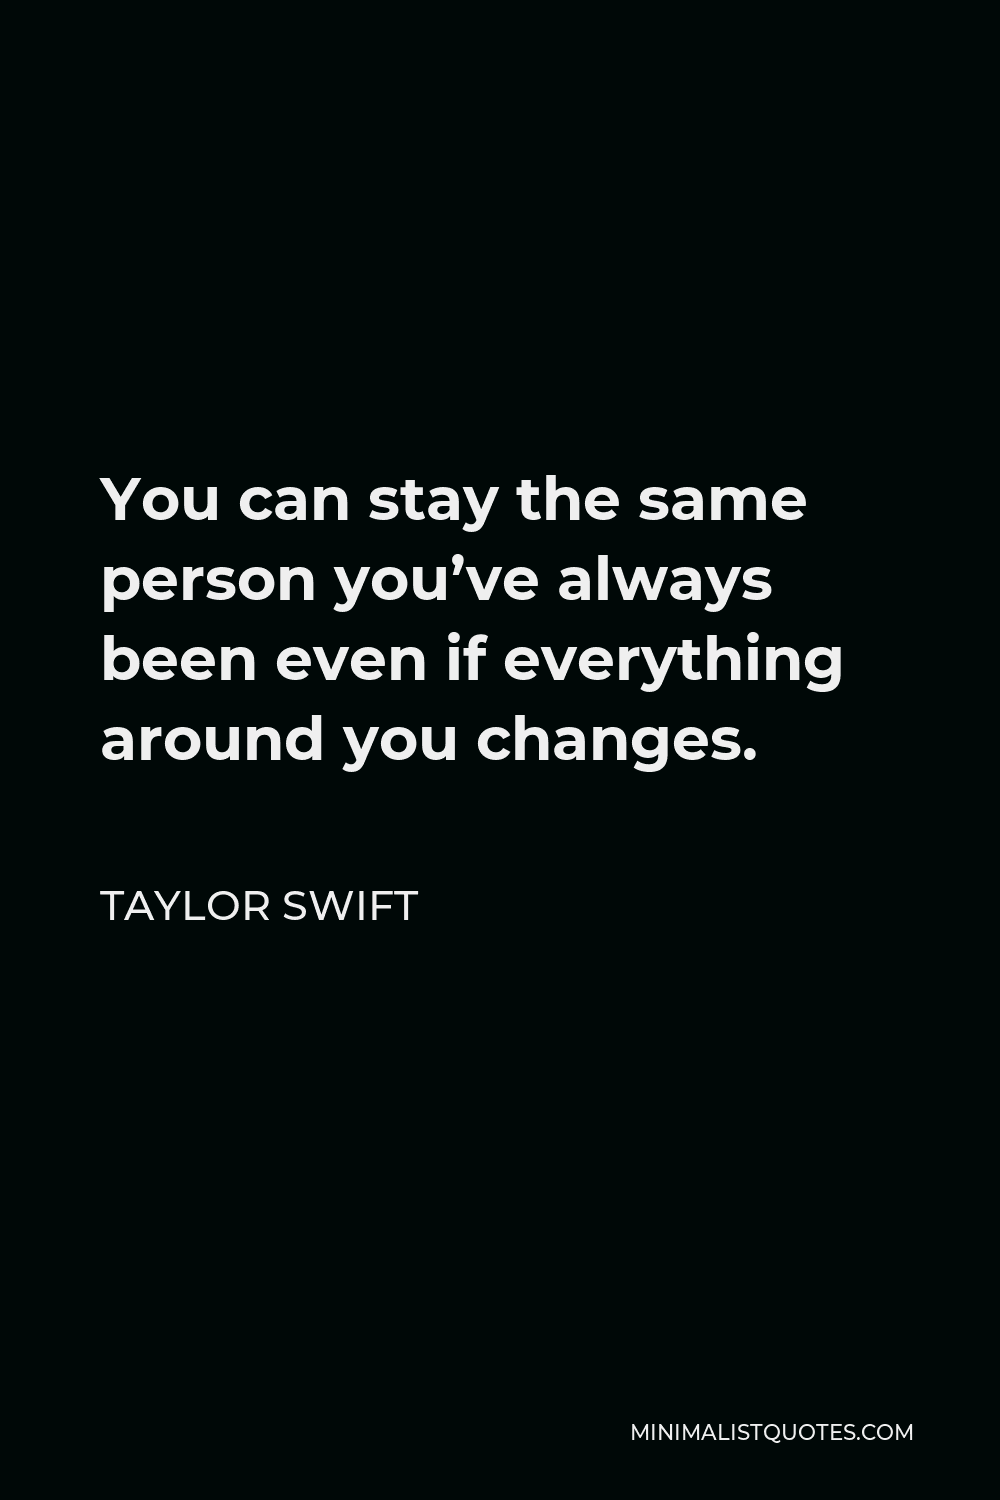 Taylor Swift Quote: You can stay the same person you've always been ...